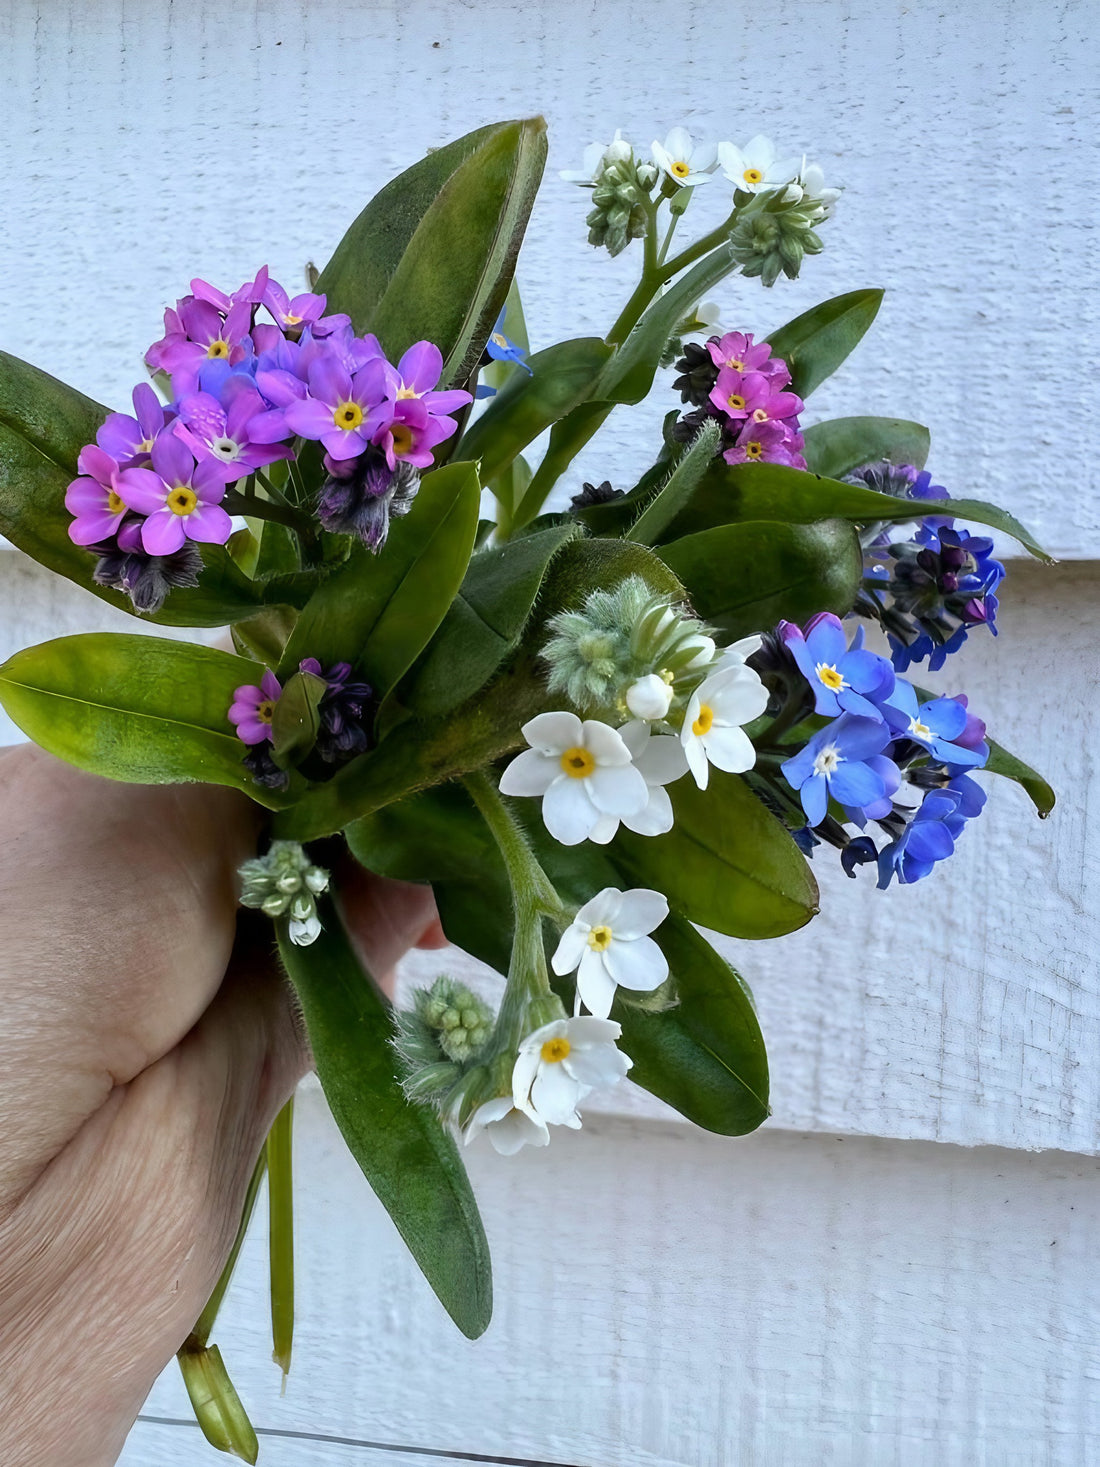 Hand presenting a bouquet of Forget-me-not Victoria Mixed flowers